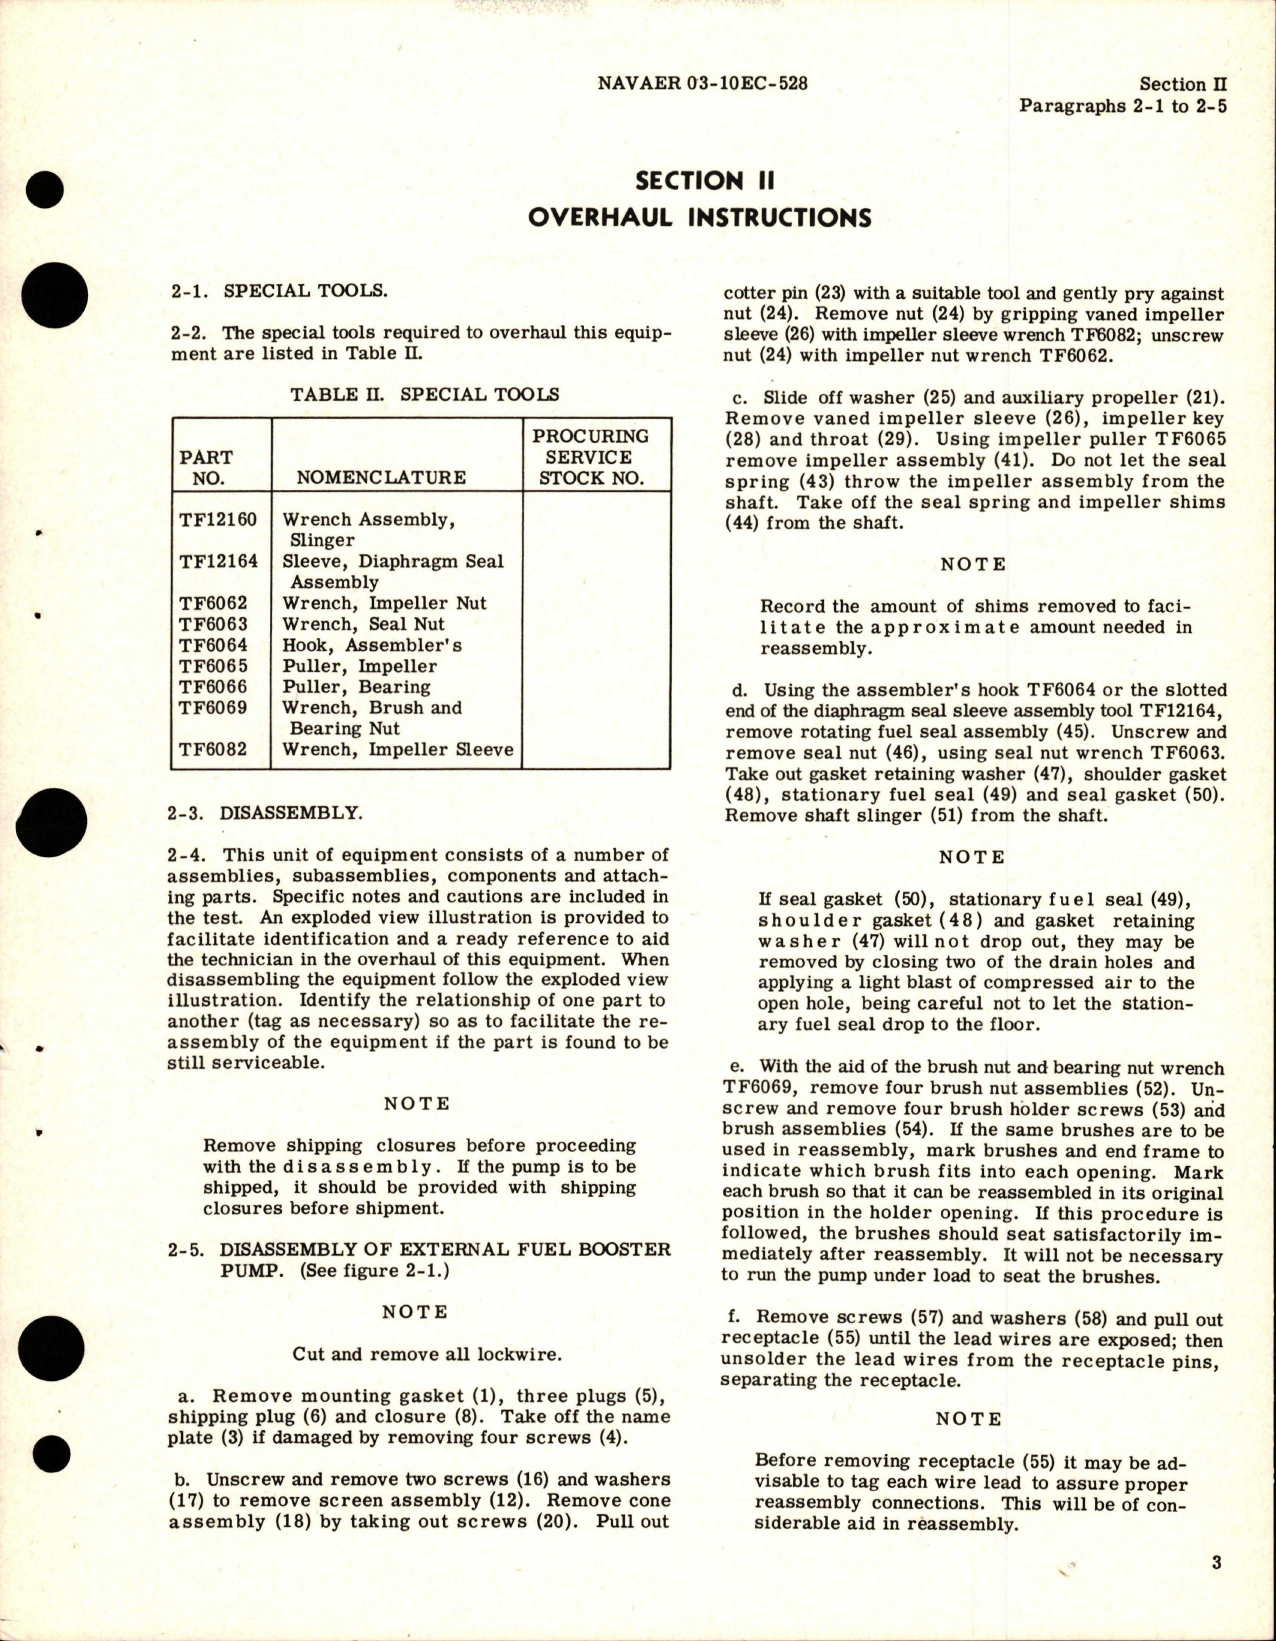 Sample page 5 from AirCorps Library document: Overhaul Instructions for External Fuel Booster Pumps